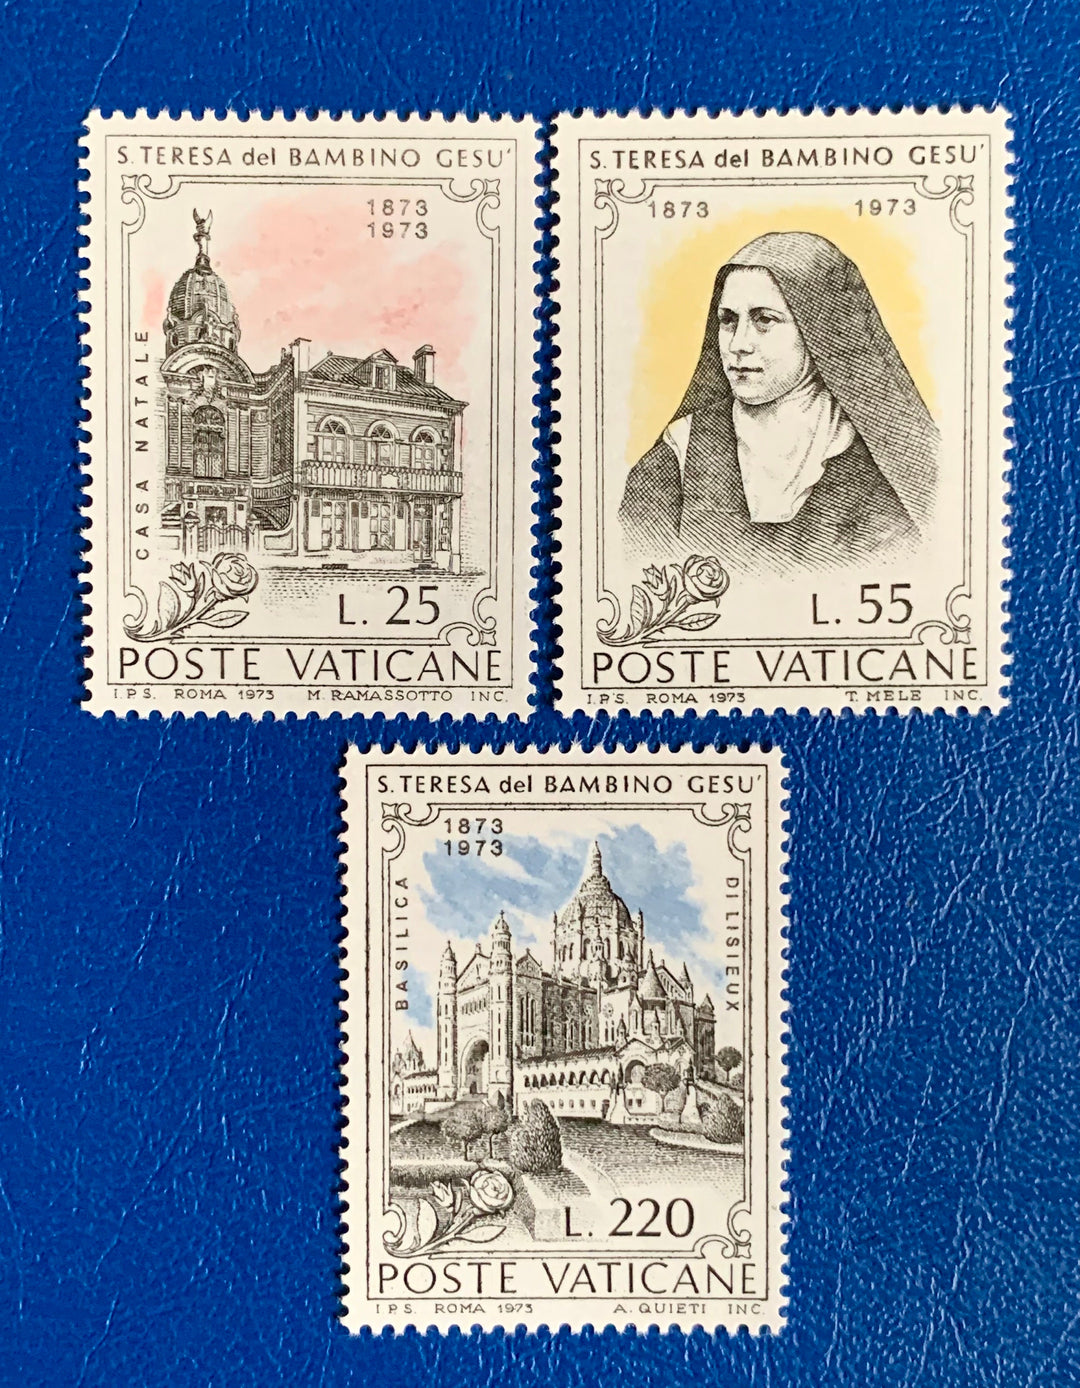 Vatican - Original Vintage Postage Stamps- 1973 - St. Theresia - for the collector, artist or crafter